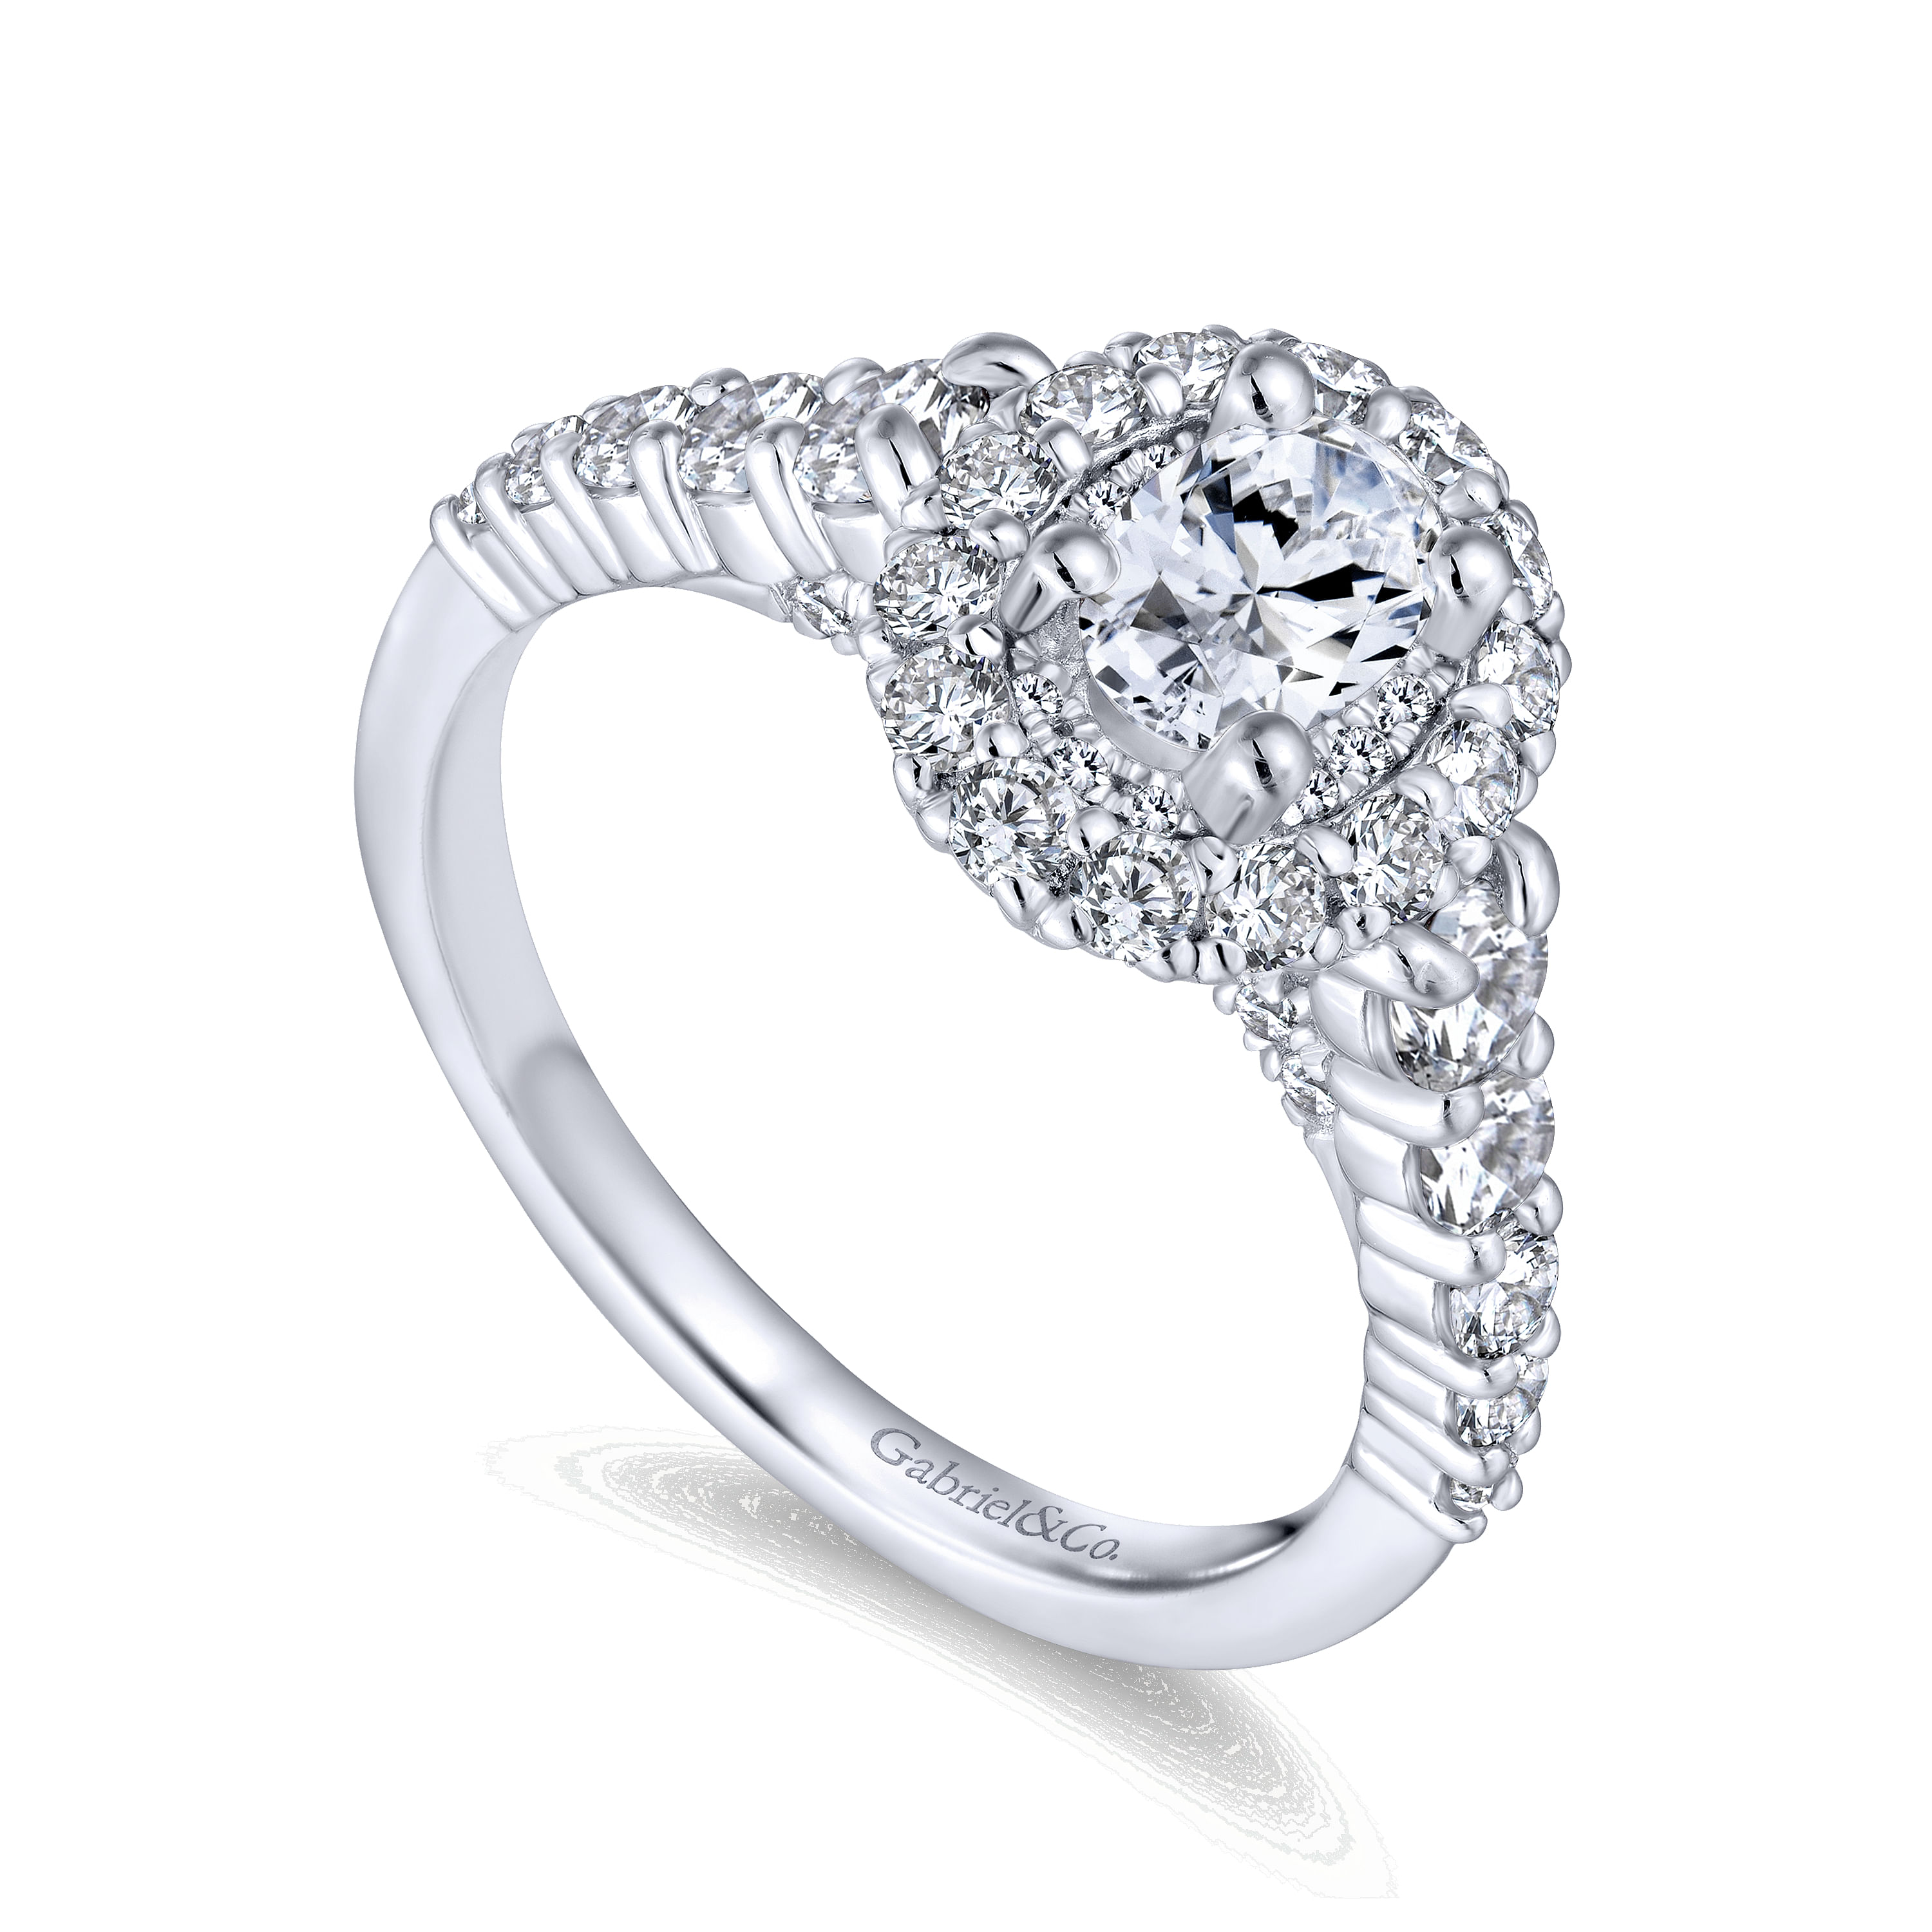 14K White Gold Oval Complete Diamond Engagement Ring